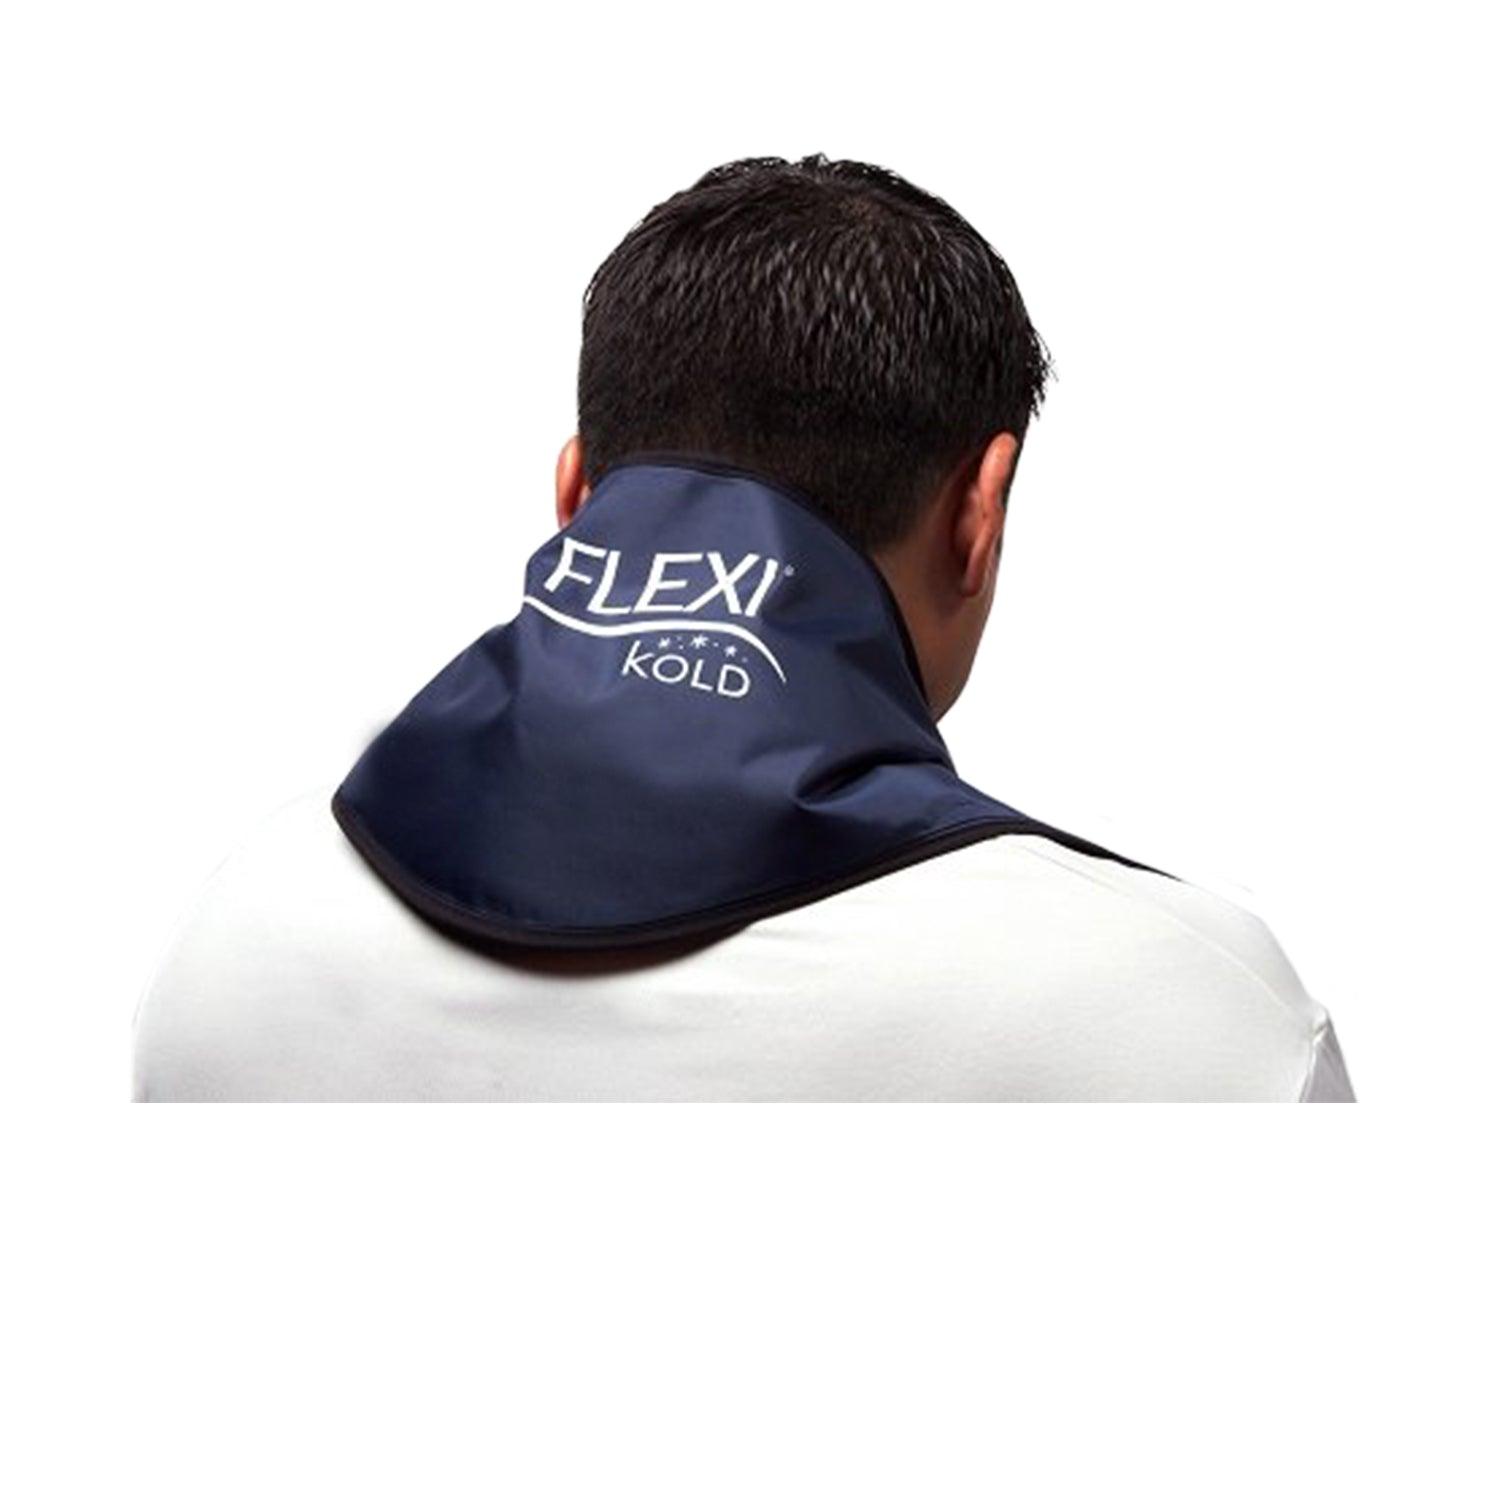 FlexiKold Comfortable Neck Gel Cold Pack with Straps